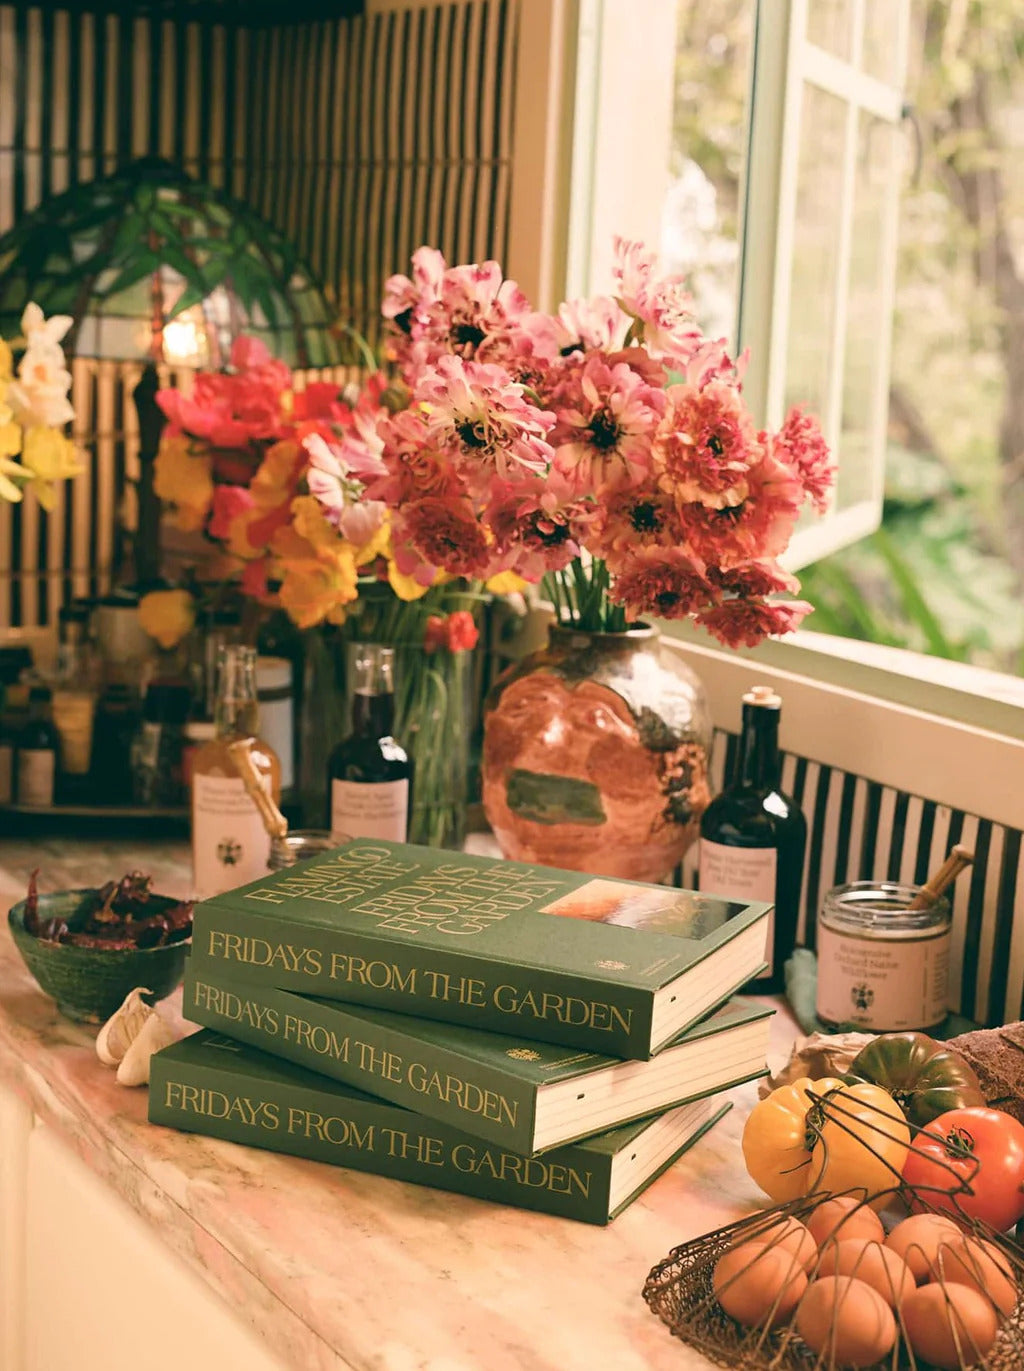 Flamingo Estate Fridays From the Garden Cookbook resting on a kitchen counter surrounded by different bottles of olive oil.